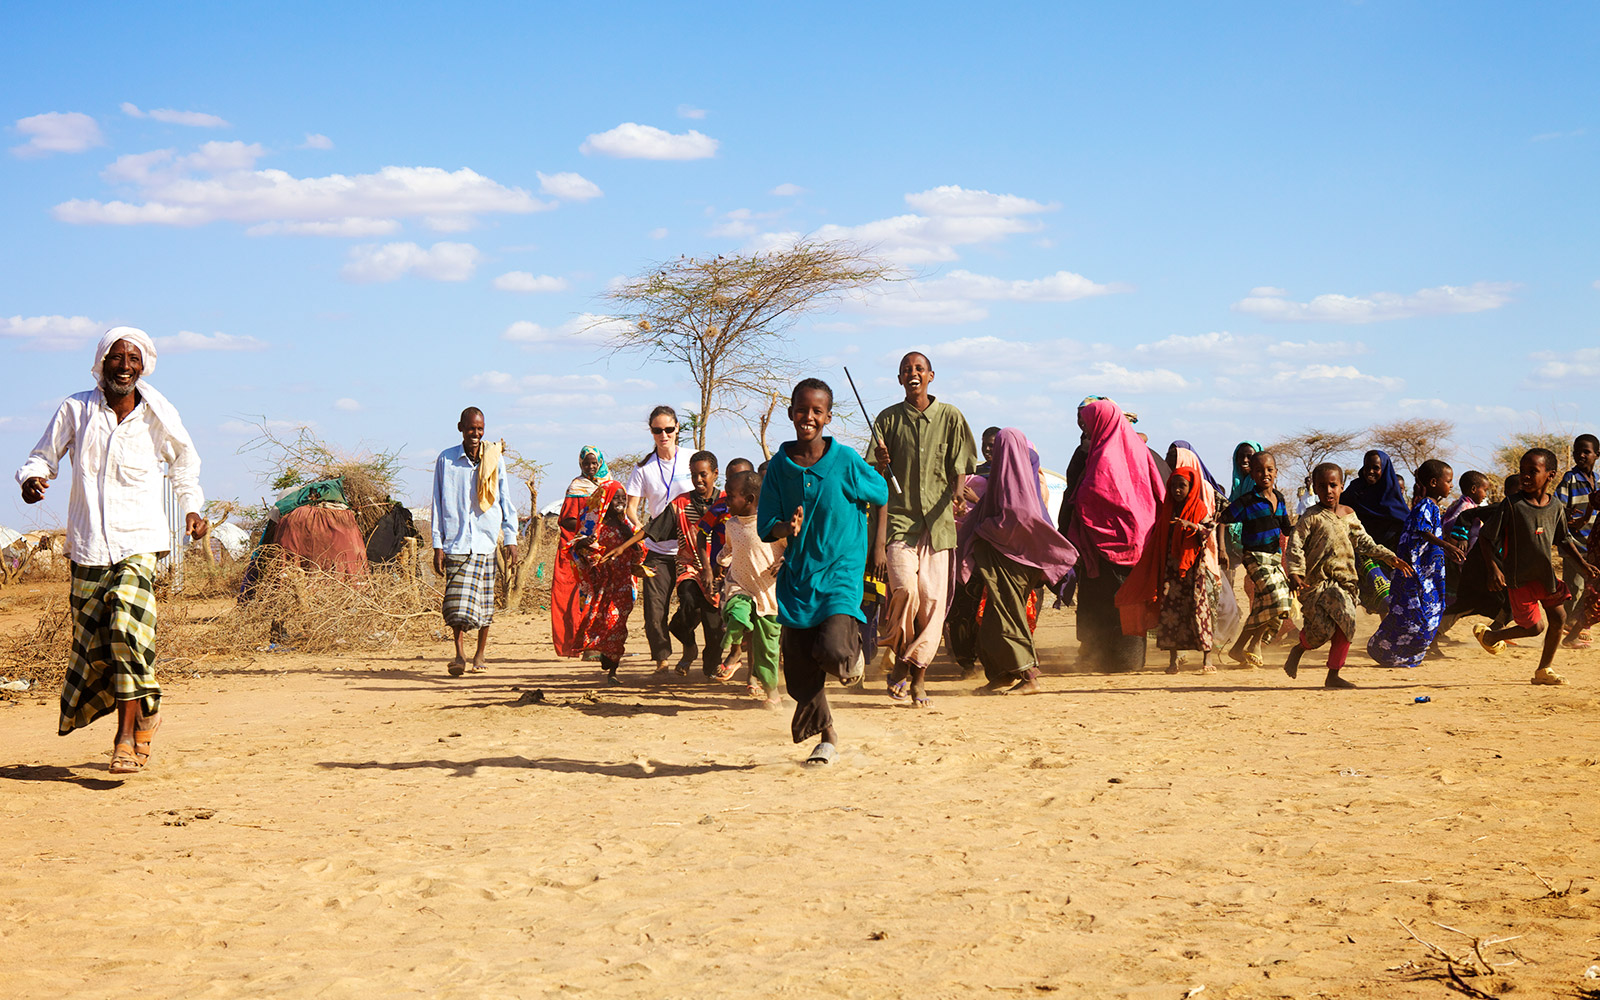 Kenya, Dadaab, refugees running in the Dagahaley camp with a physiotherapist from HI.